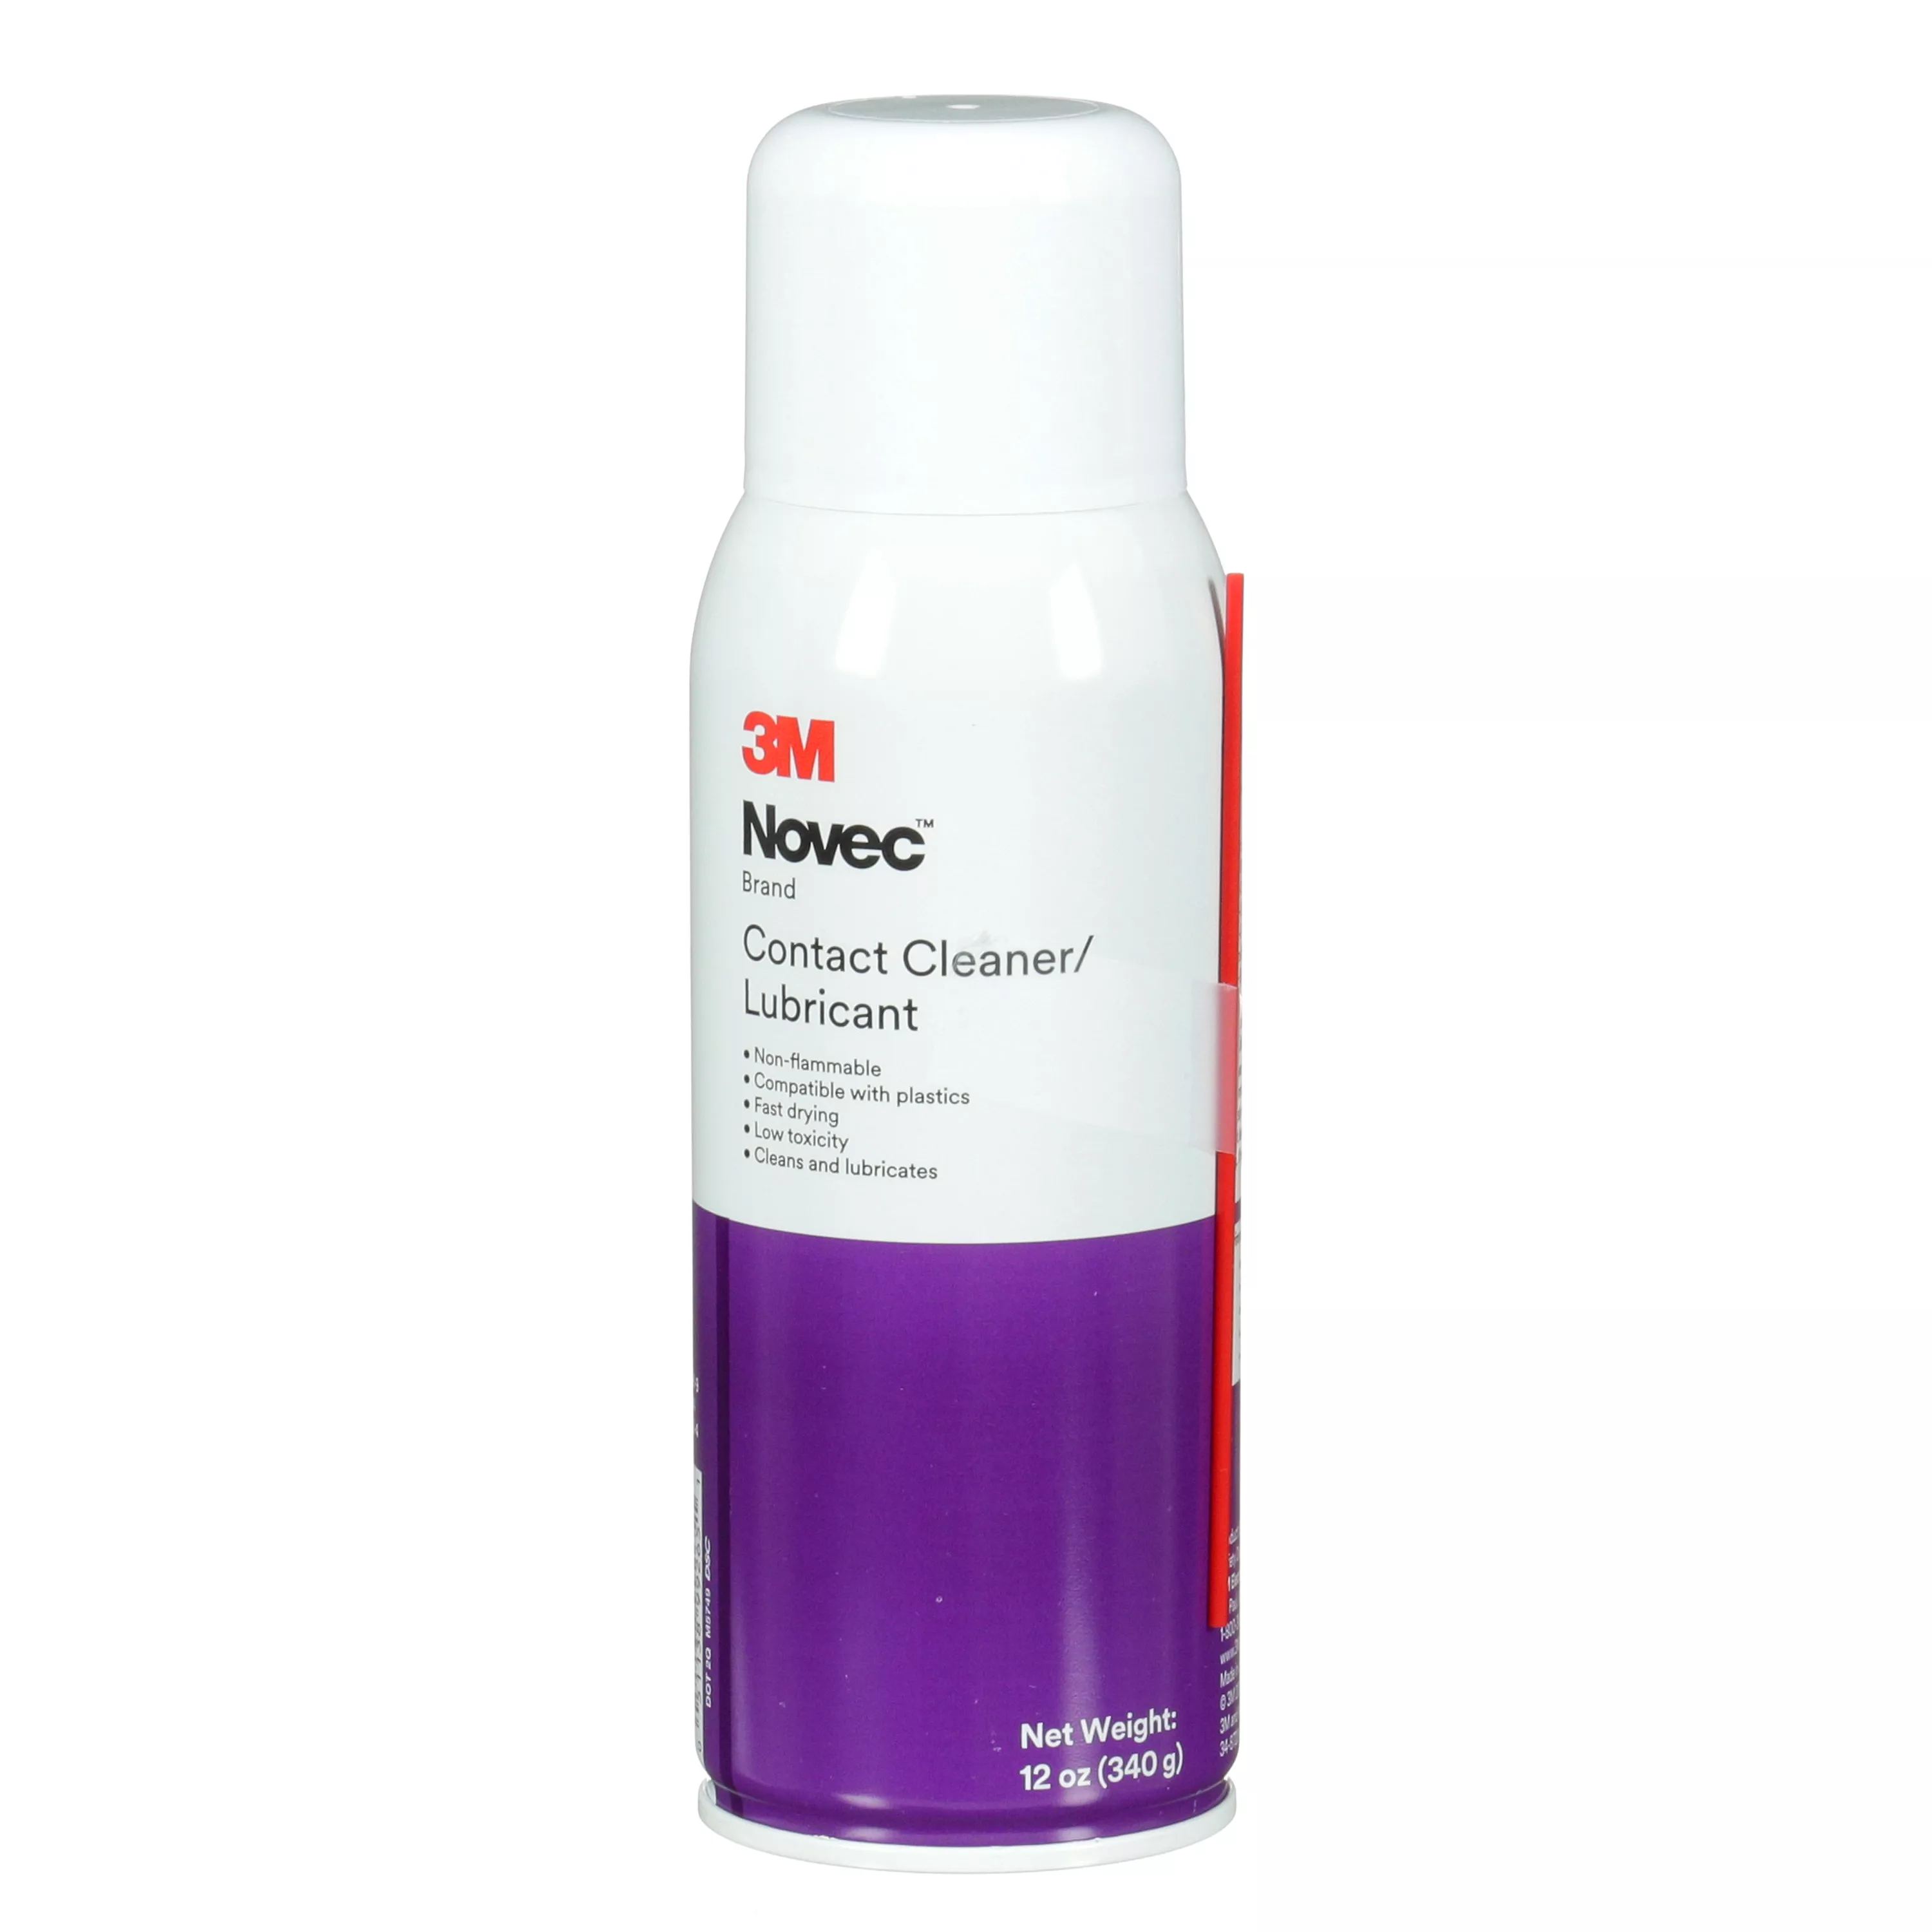 SKU 7010402232 | 3M™ Novec™ Contact Cleaner/Lubricant